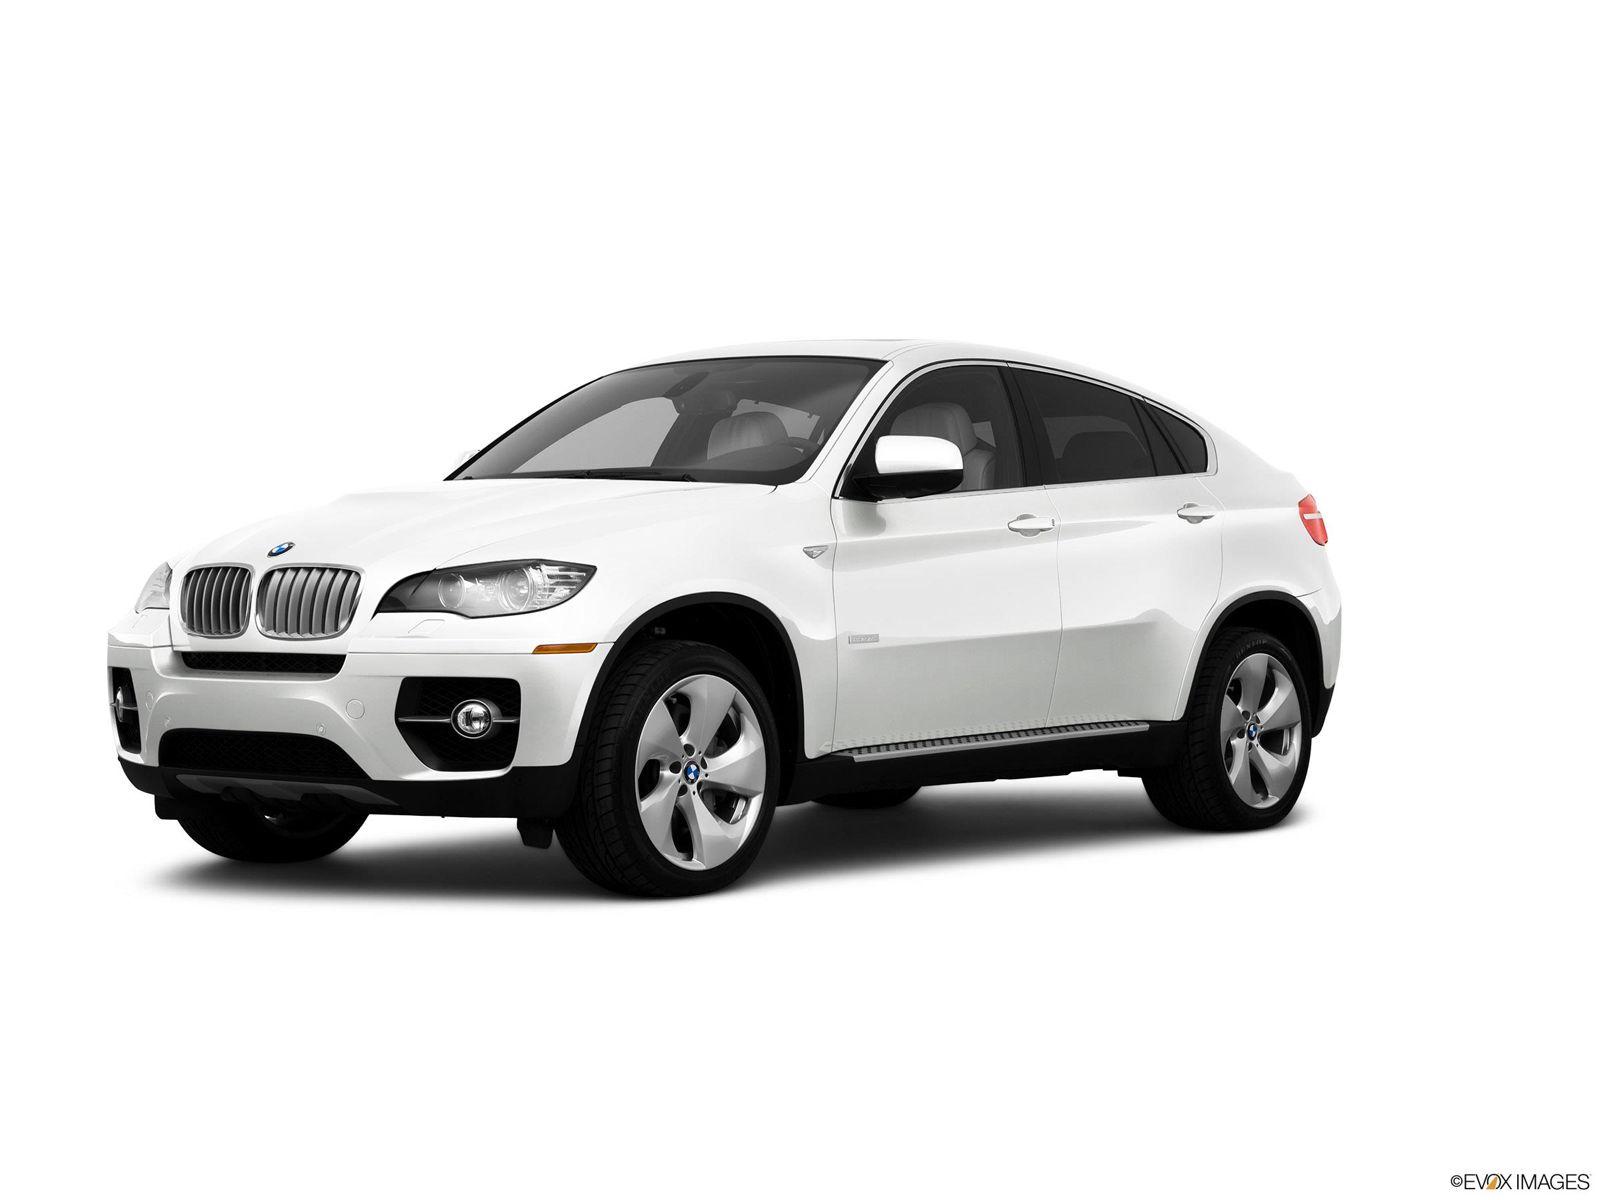 2010 BMW X6 Hybrid Research, Photos, Specs and Expertise | CarMax